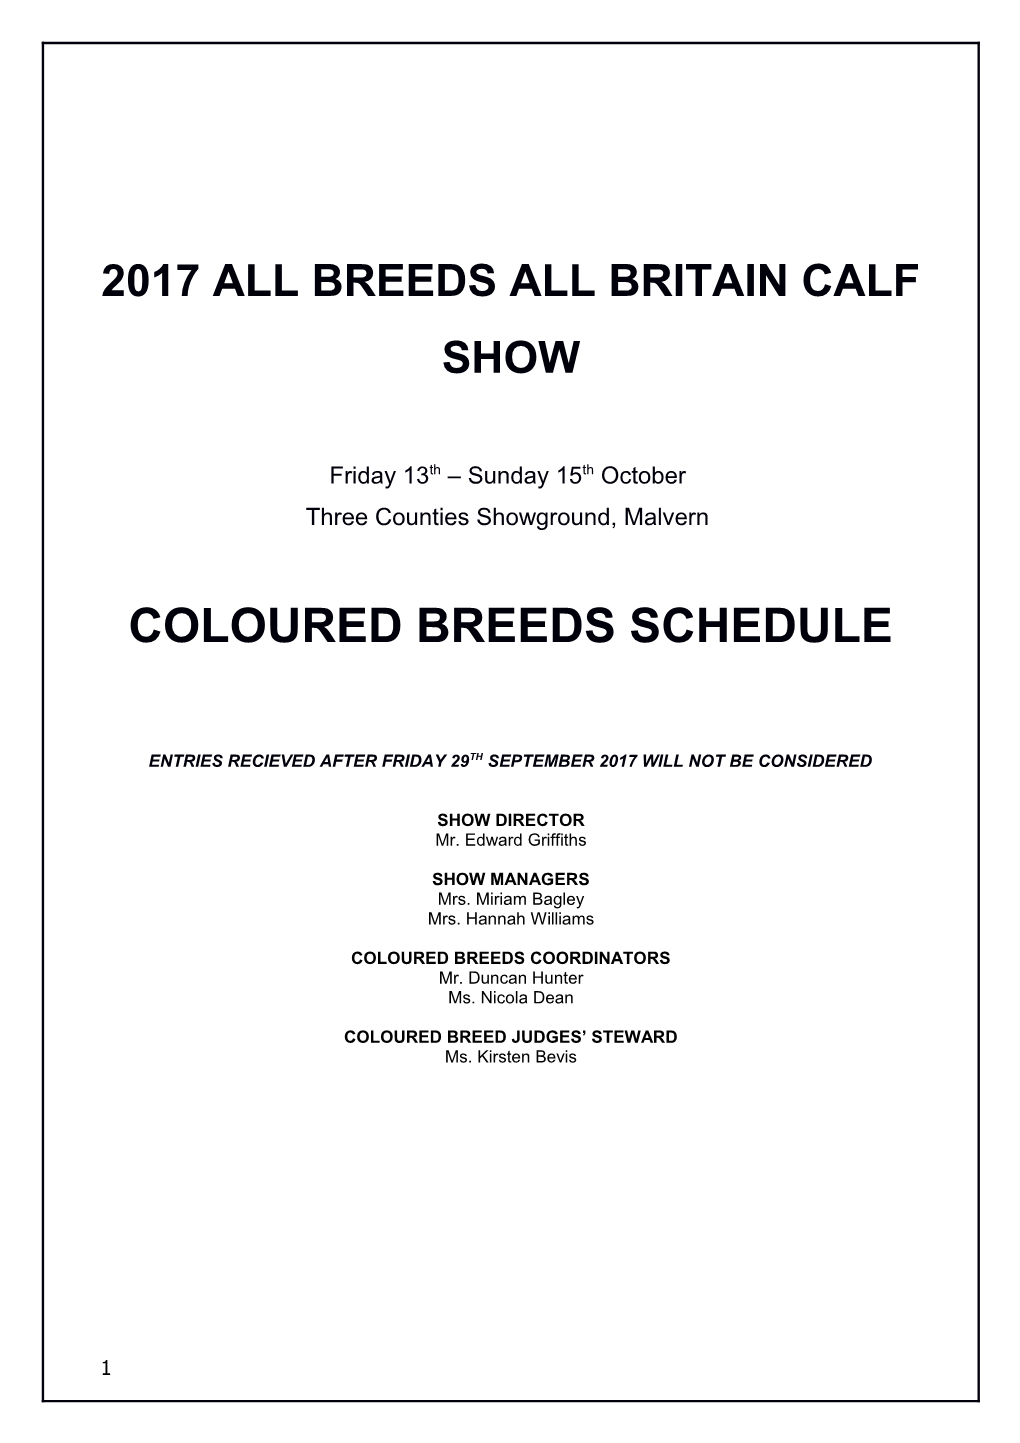 All Breeds All-Britain